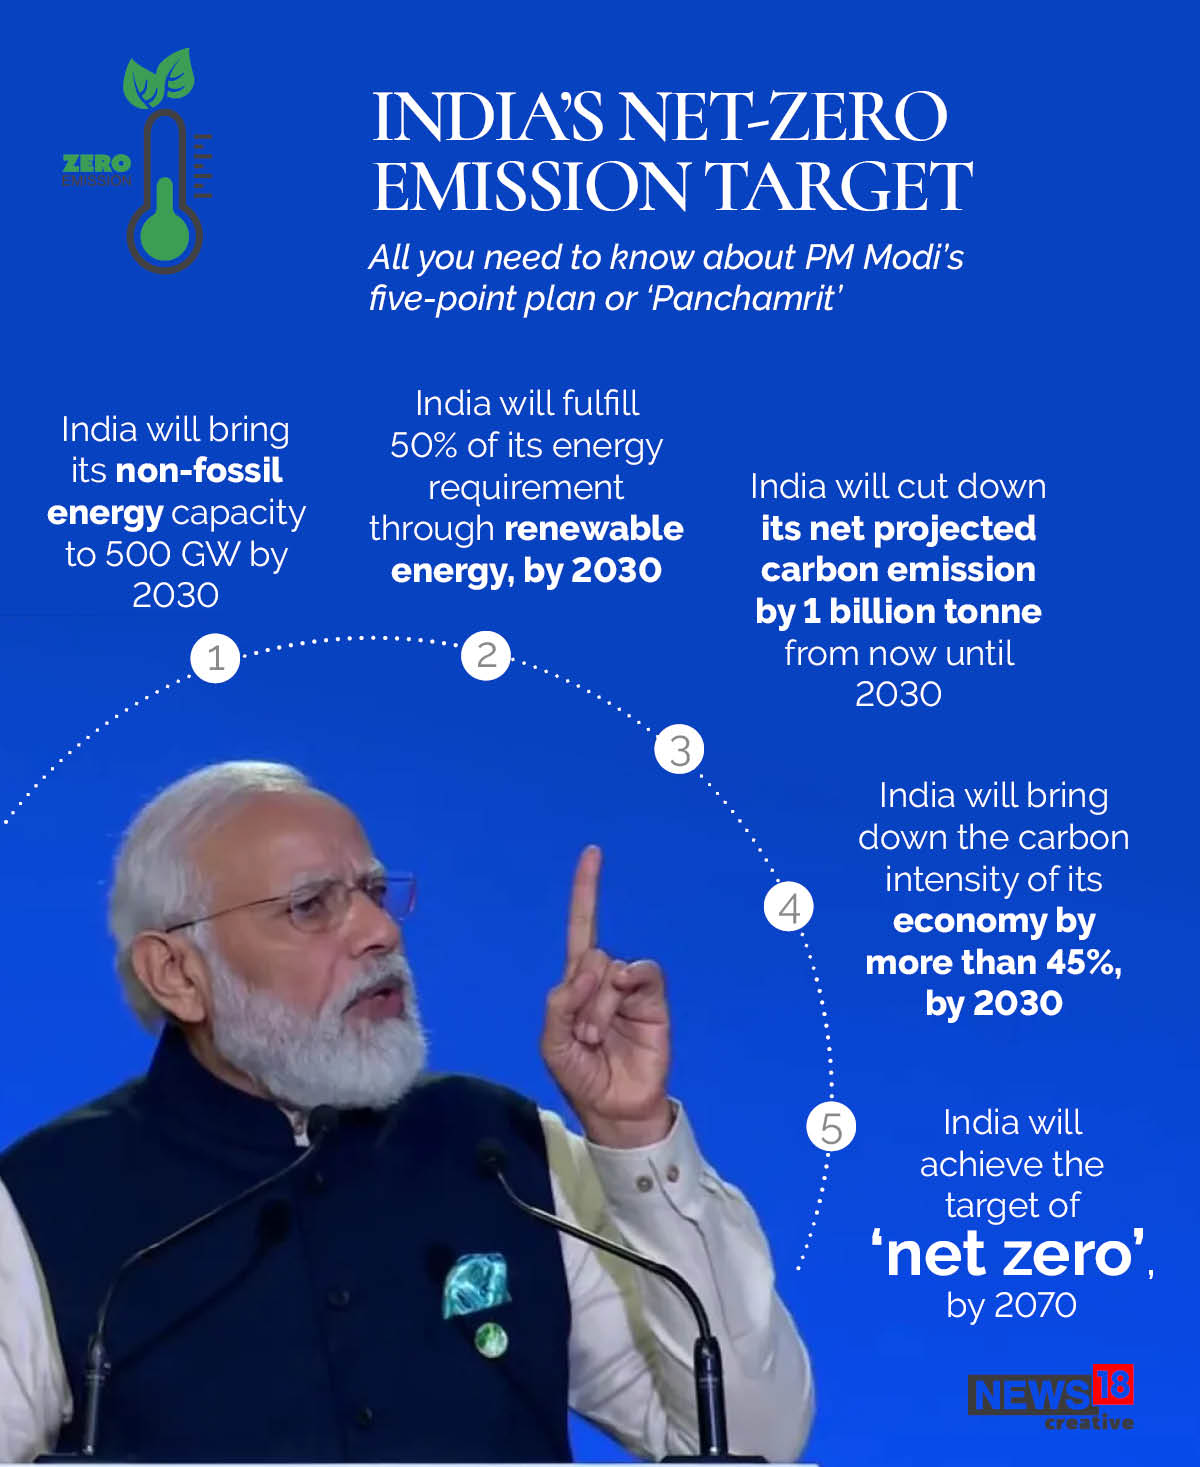 India sets net-zero target at 2070: A look at other climate targets announced by PM Modi